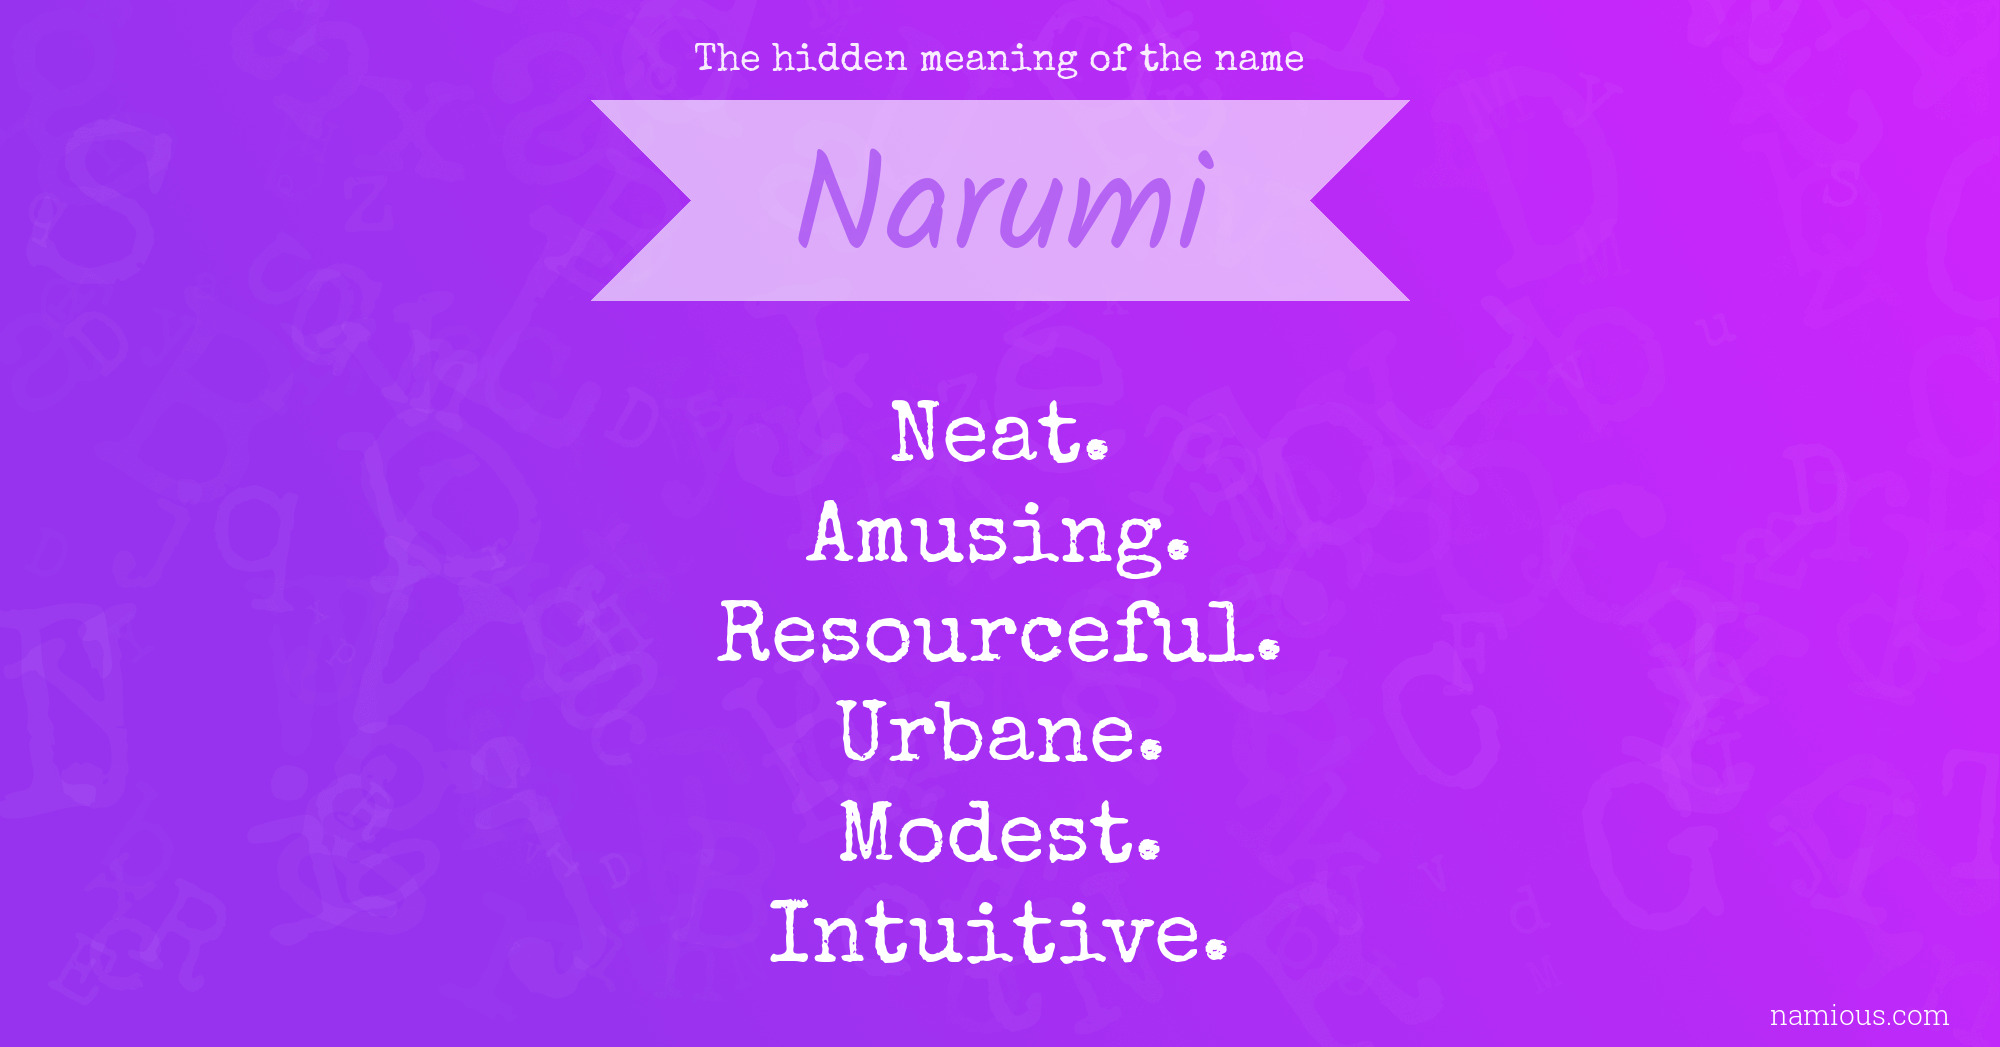 The hidden meaning of the name Narumi